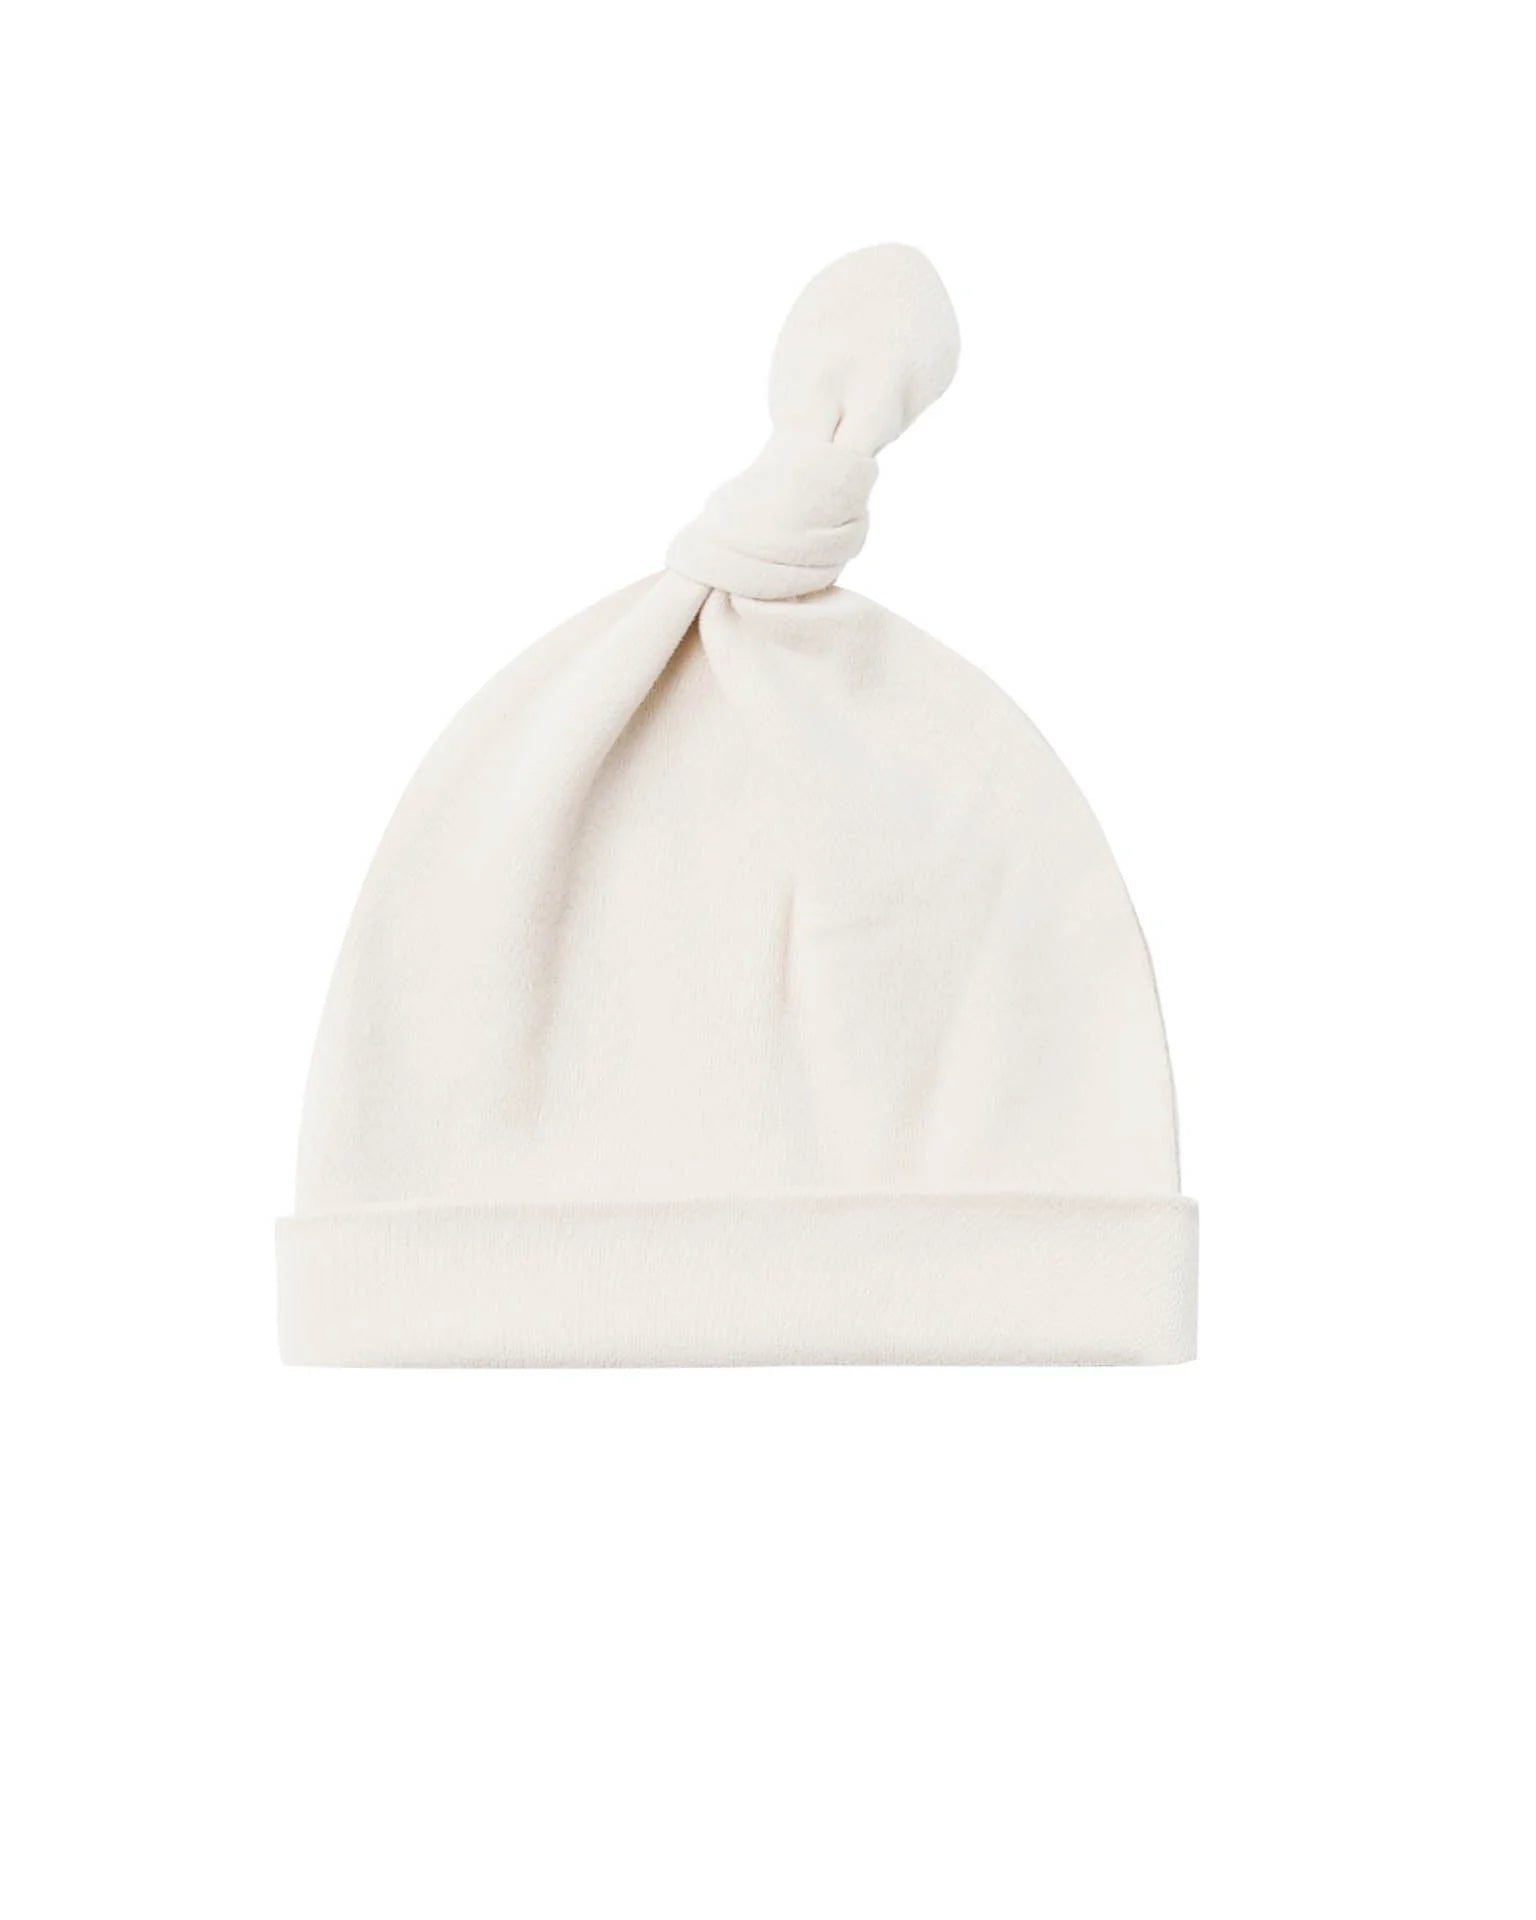 QUINCY MAE KNOTTED BABY HAT / IVORY